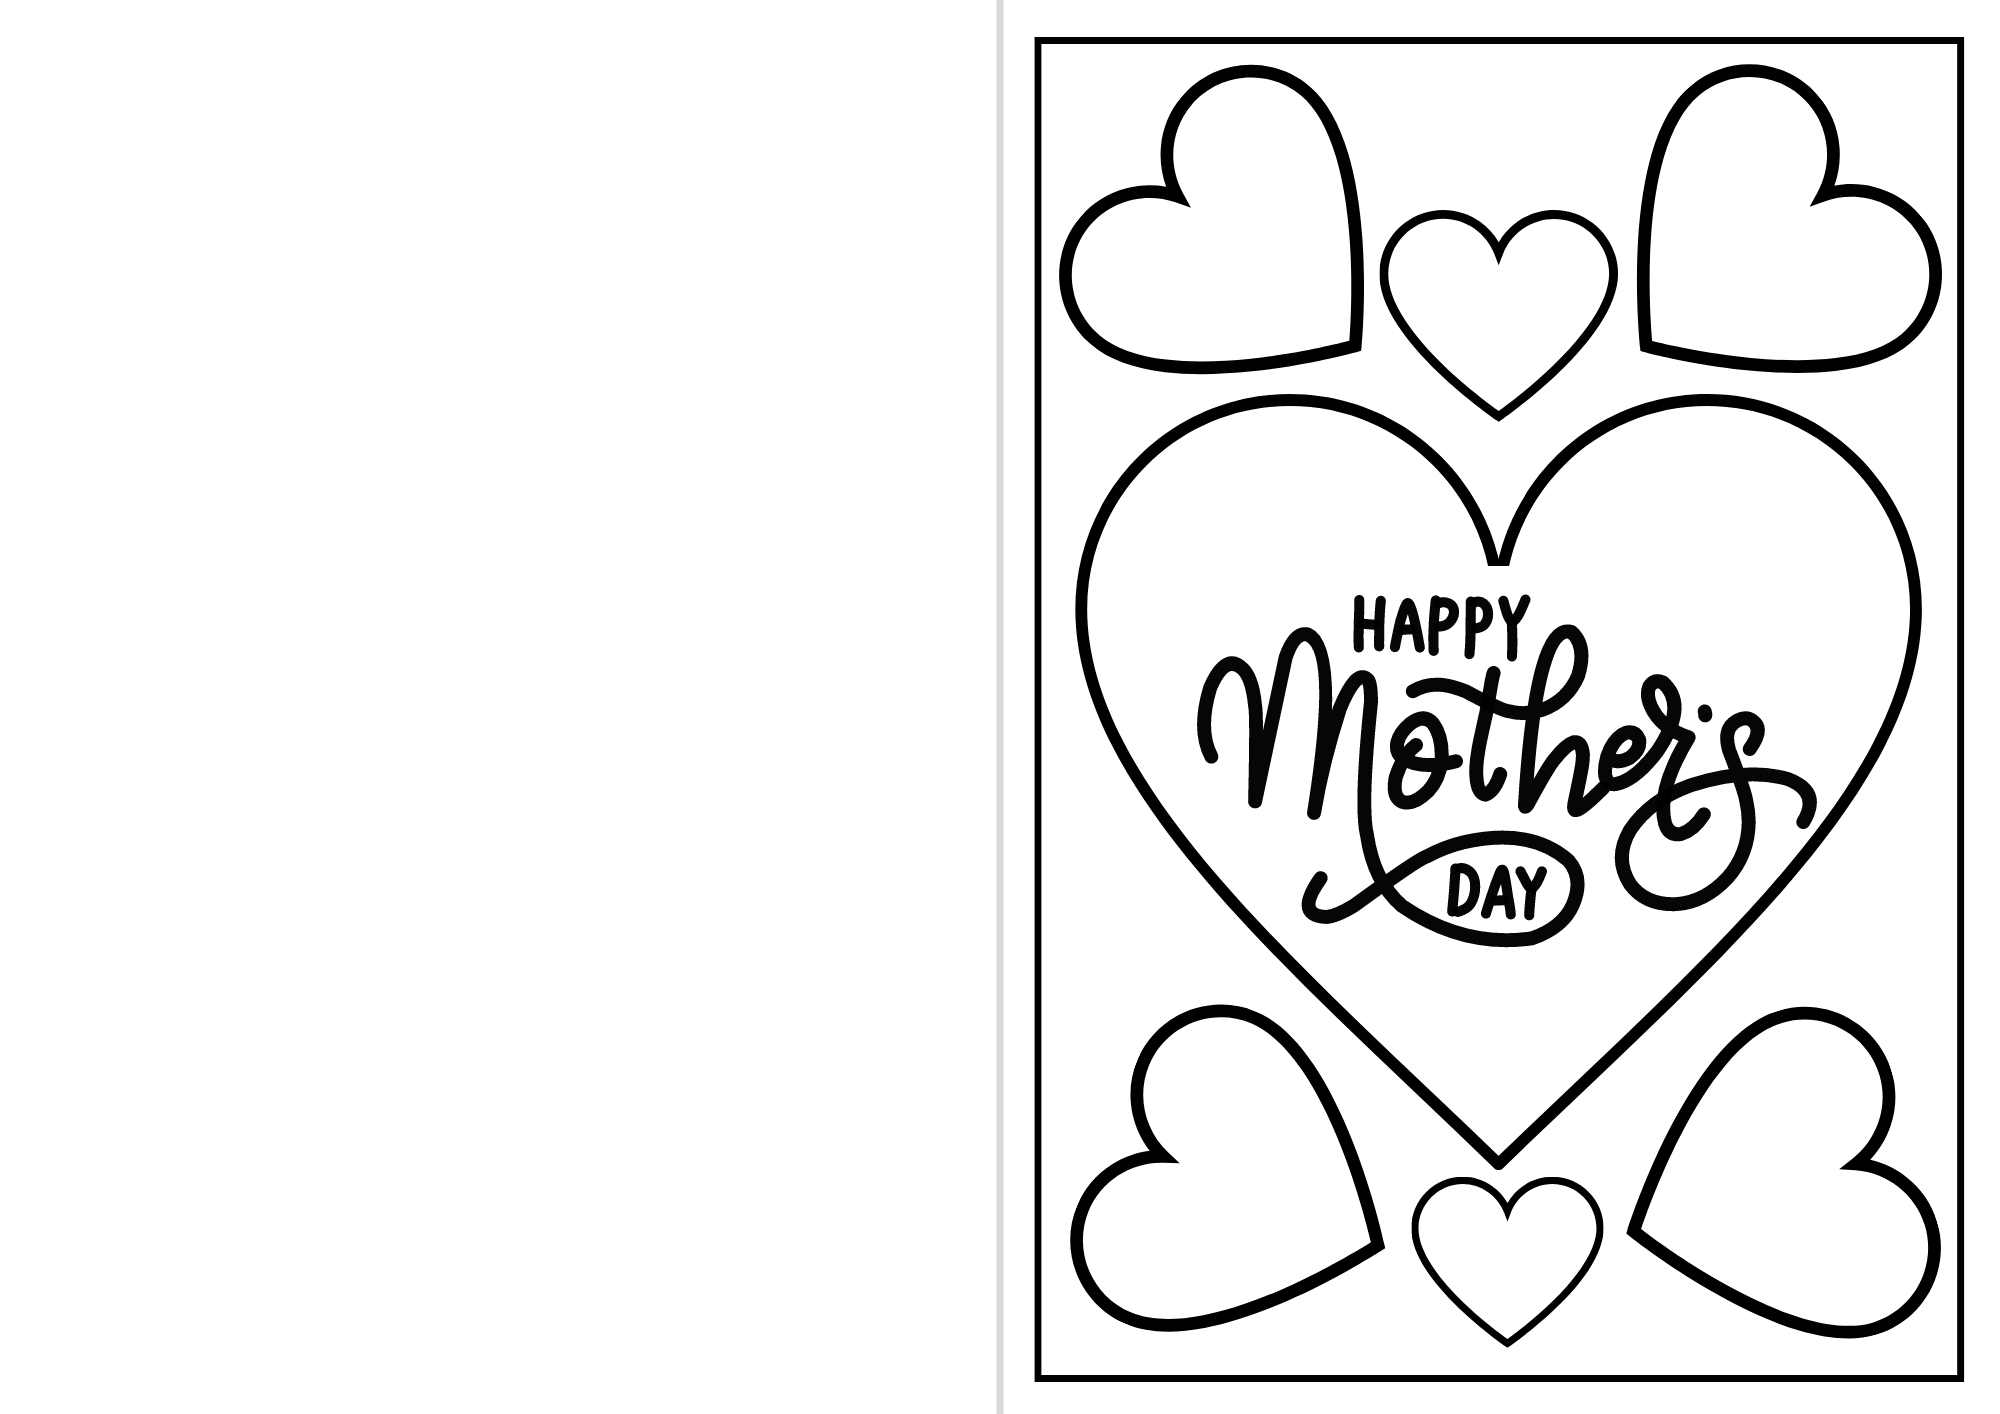 Mother's Day 4 Coloring Heart Cards for Mom or Mum